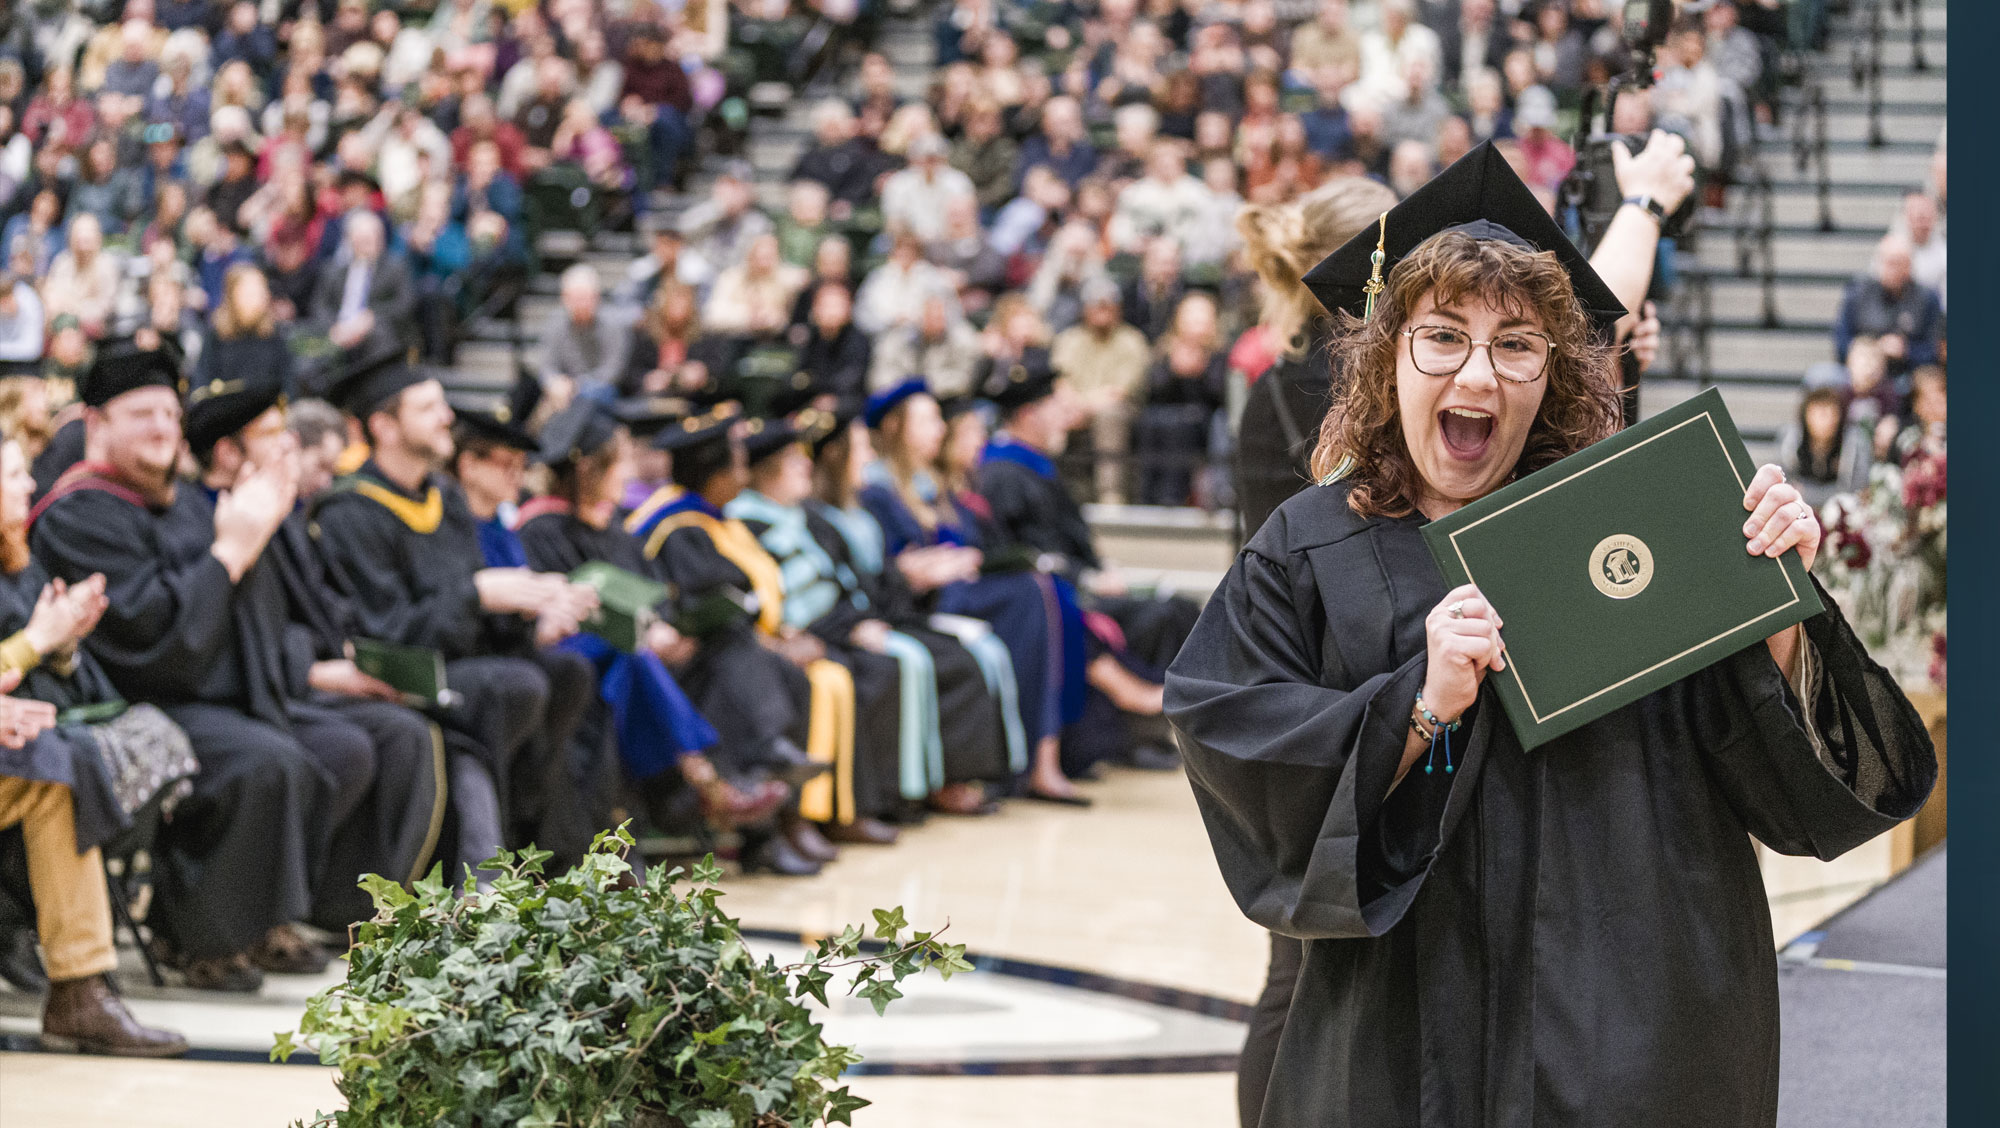 BHSU graduate poses smiling with degree at a commencement ceremony